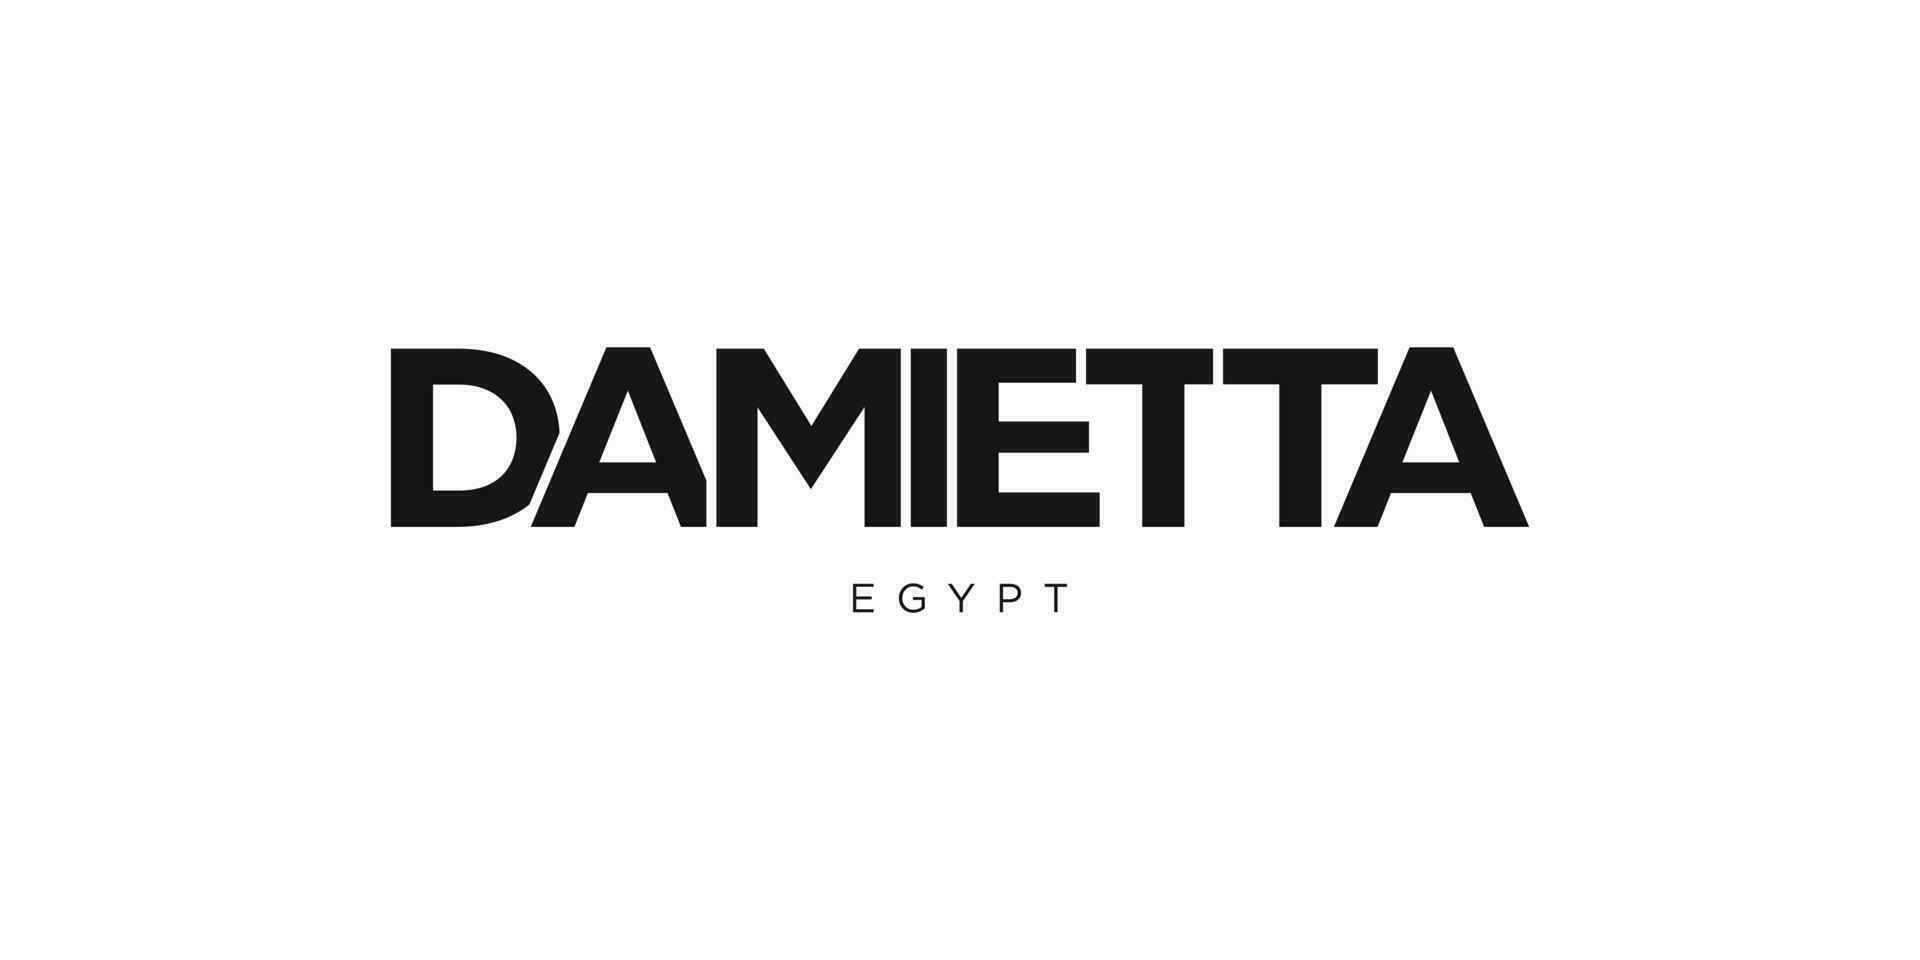 Damietta in the Egypt emblem. The design features a geometric style, vector illustration with bold typography in a modern font. The graphic slogan lettering.